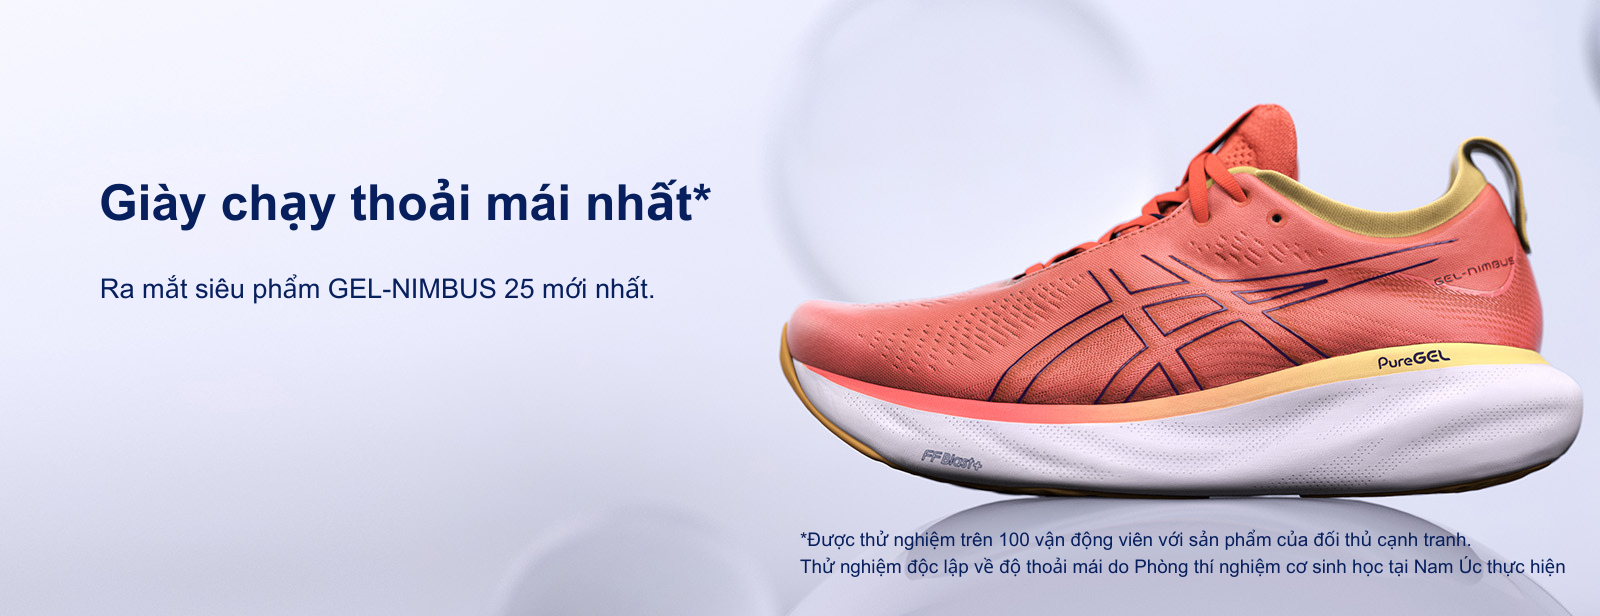 Asics Vietnam | Official Running Shoes & Clothing